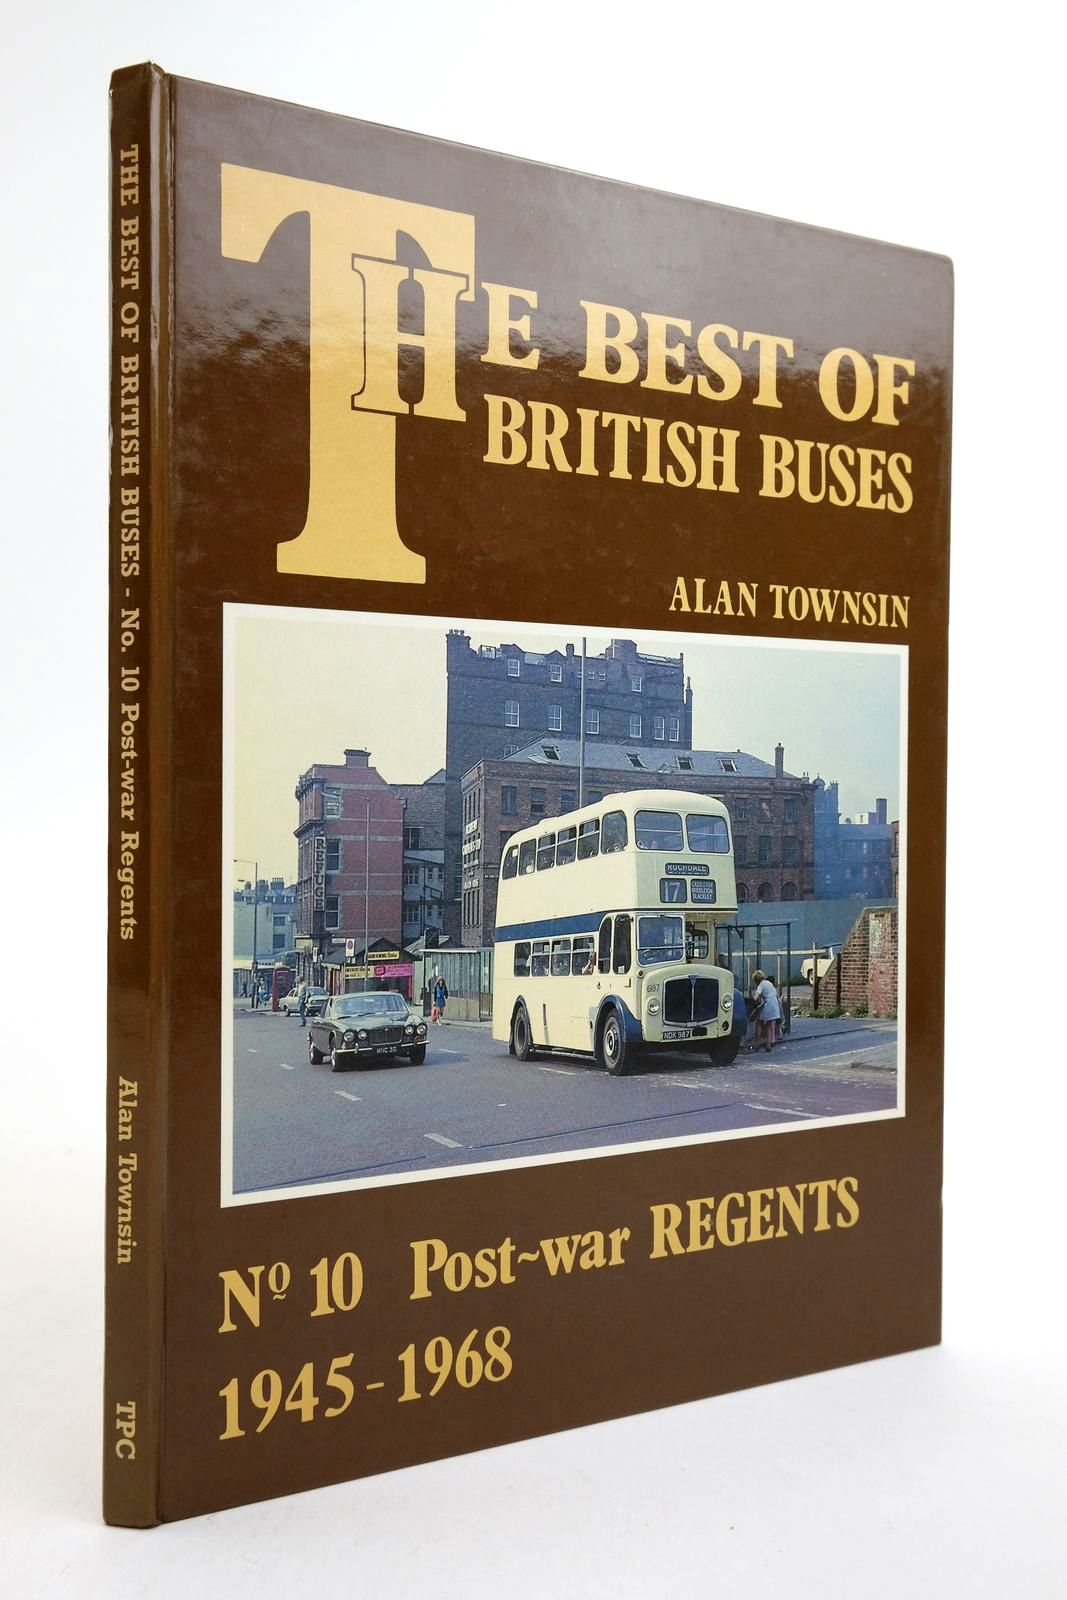 Photo of THE BEST OF BRITISH BUSES No. 10 POST-WAR REGENTS 1945-1968 written by Townsin, Alan published by The Transport Publishing Company (STOCK CODE: 2139661)  for sale by Stella & Rose's Books